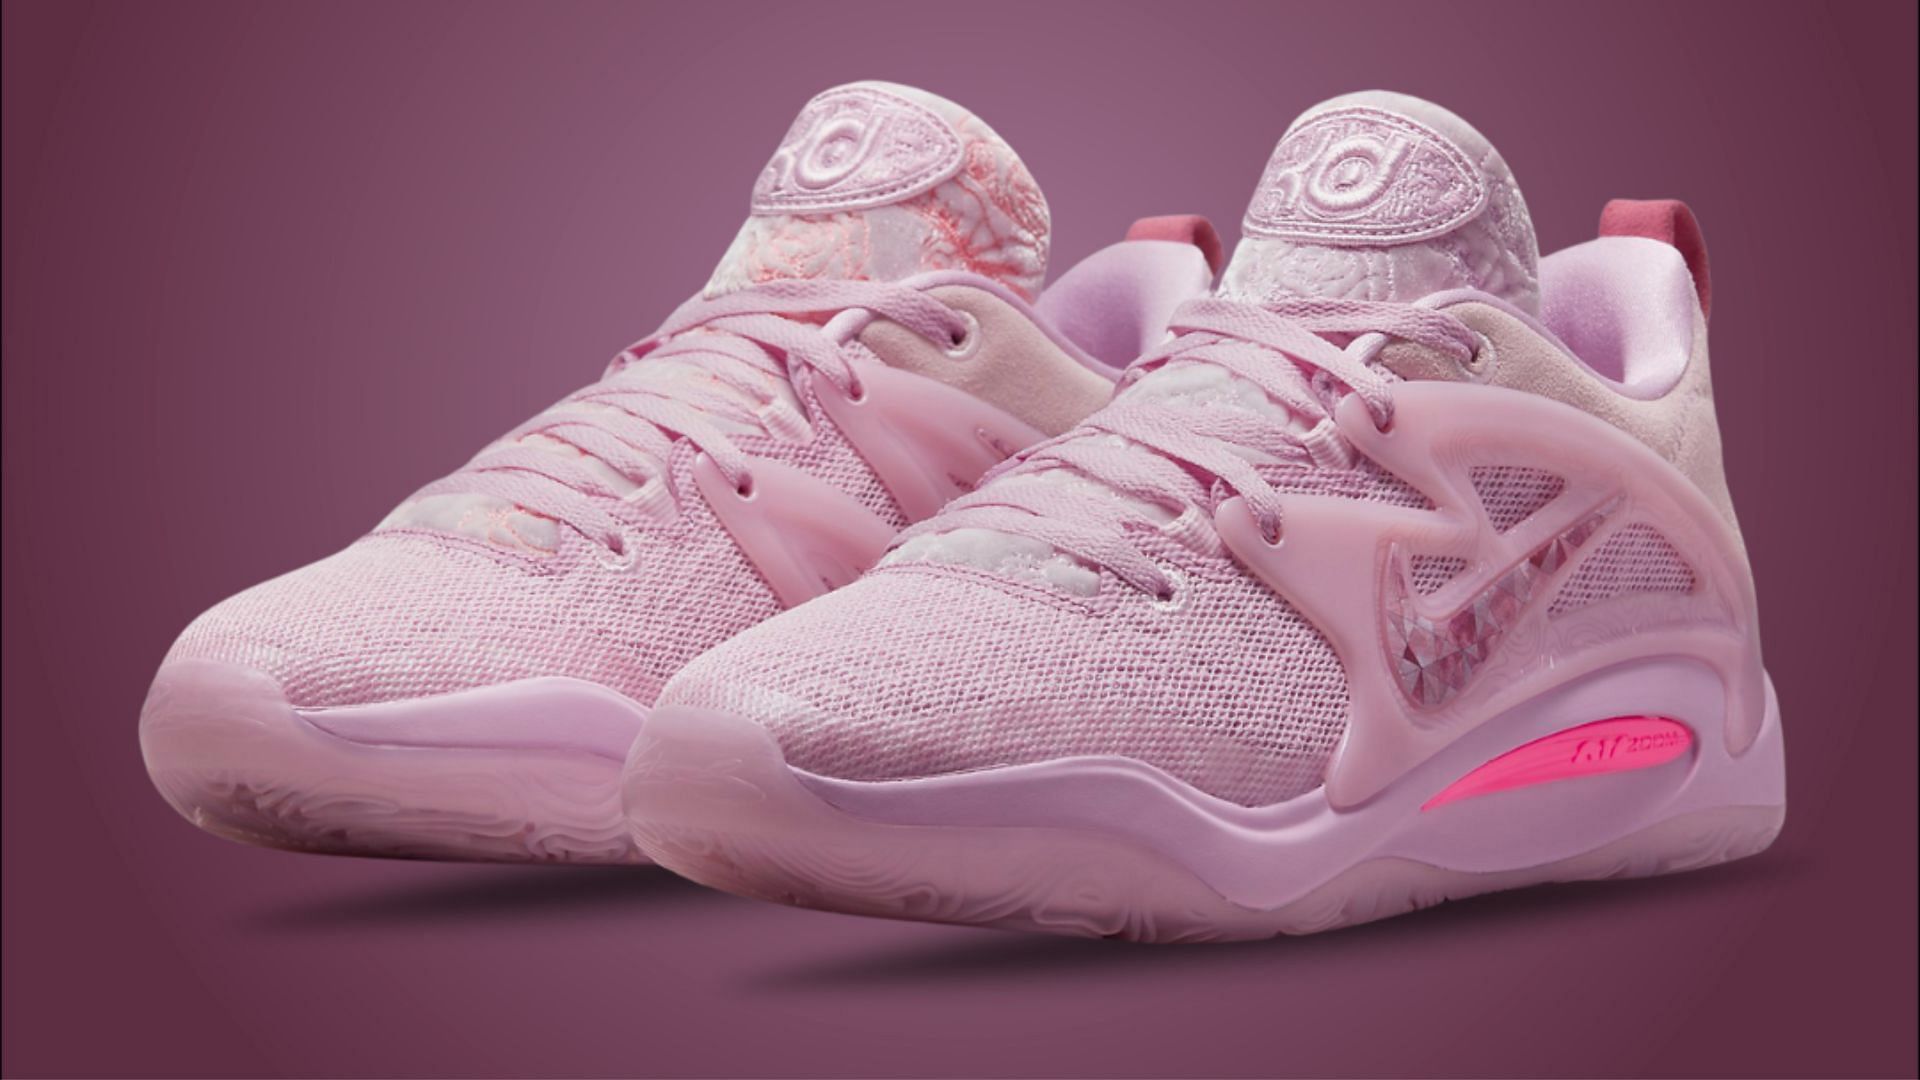 NIKE KD15 AUNT PEARL ピンク 26.5cm